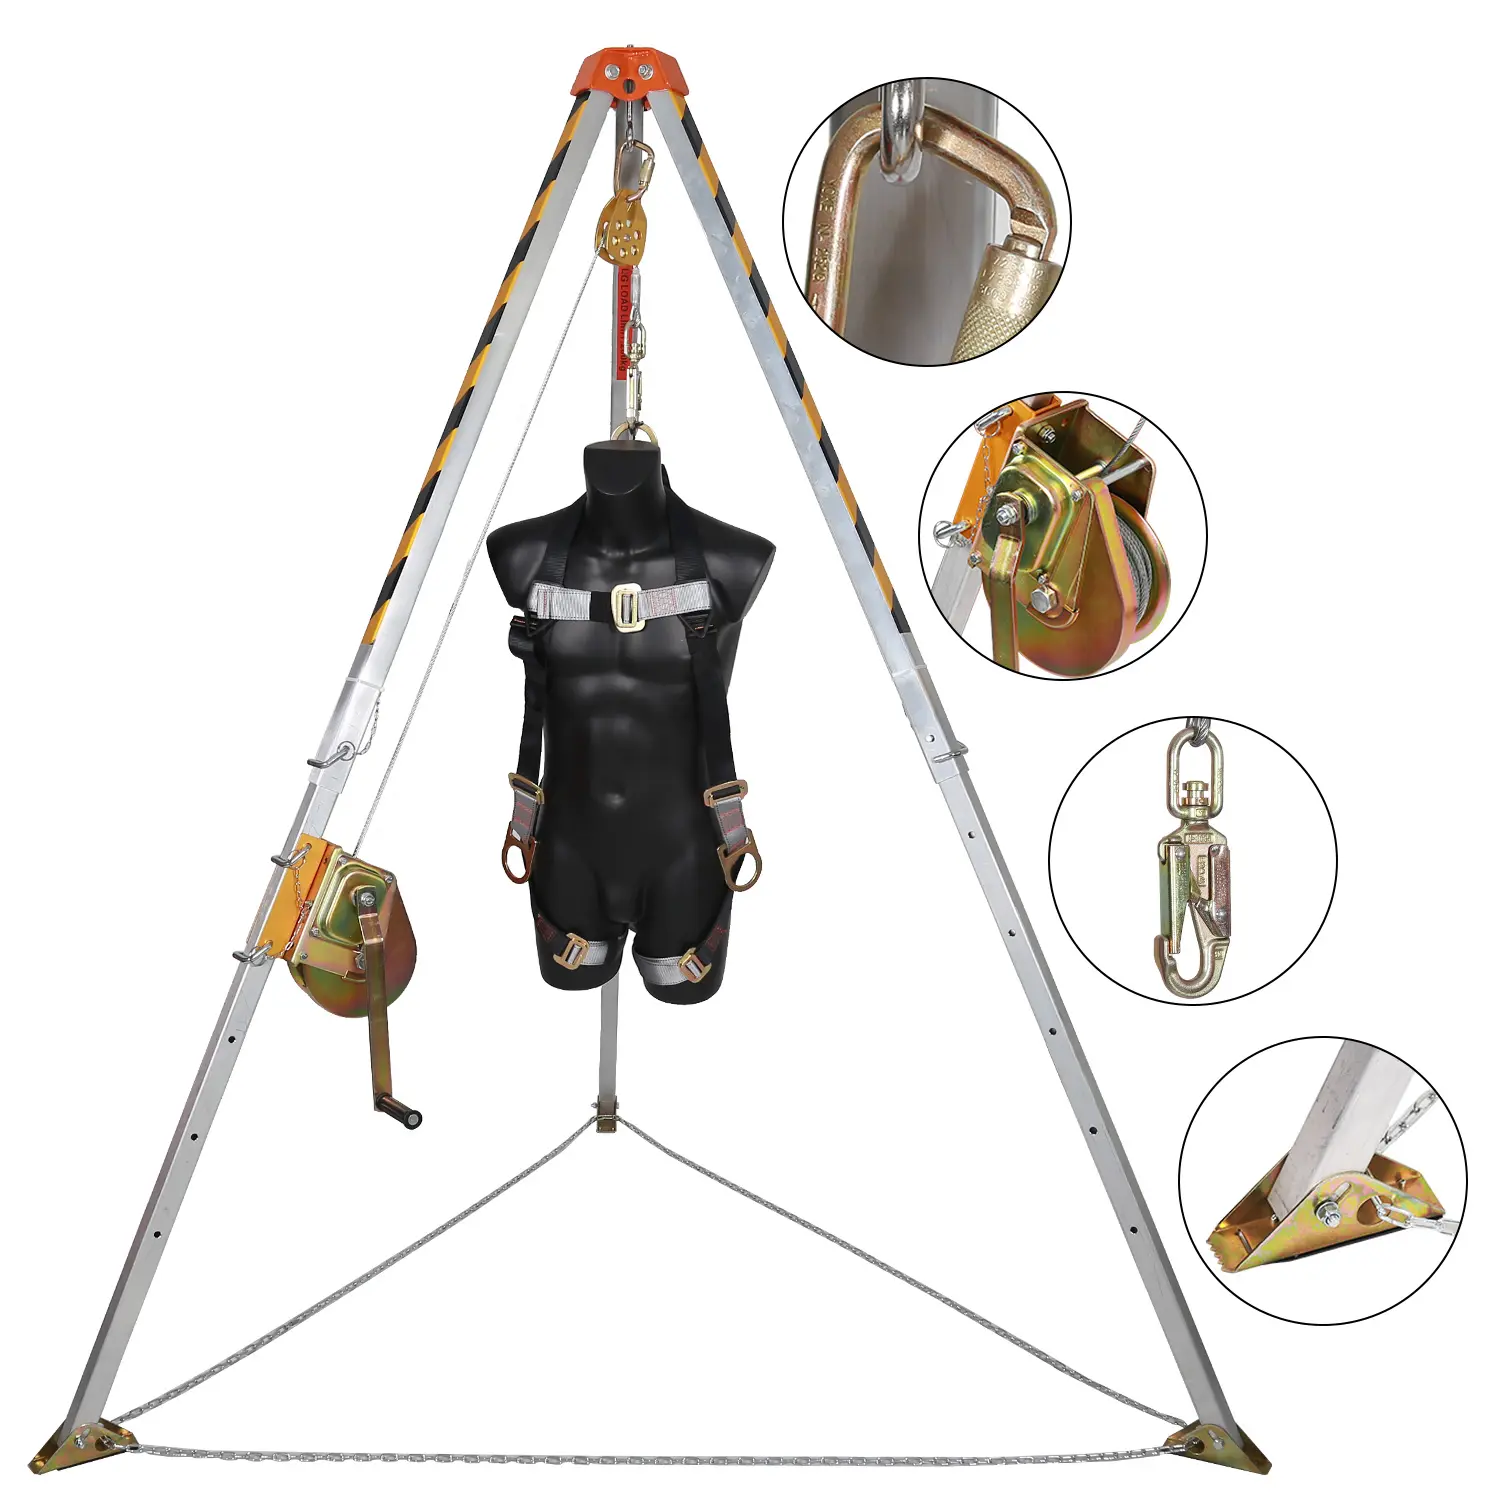 KSEIBI Confined Space Safety Rescue Aluminium Tripod Kit with Full Body Harness